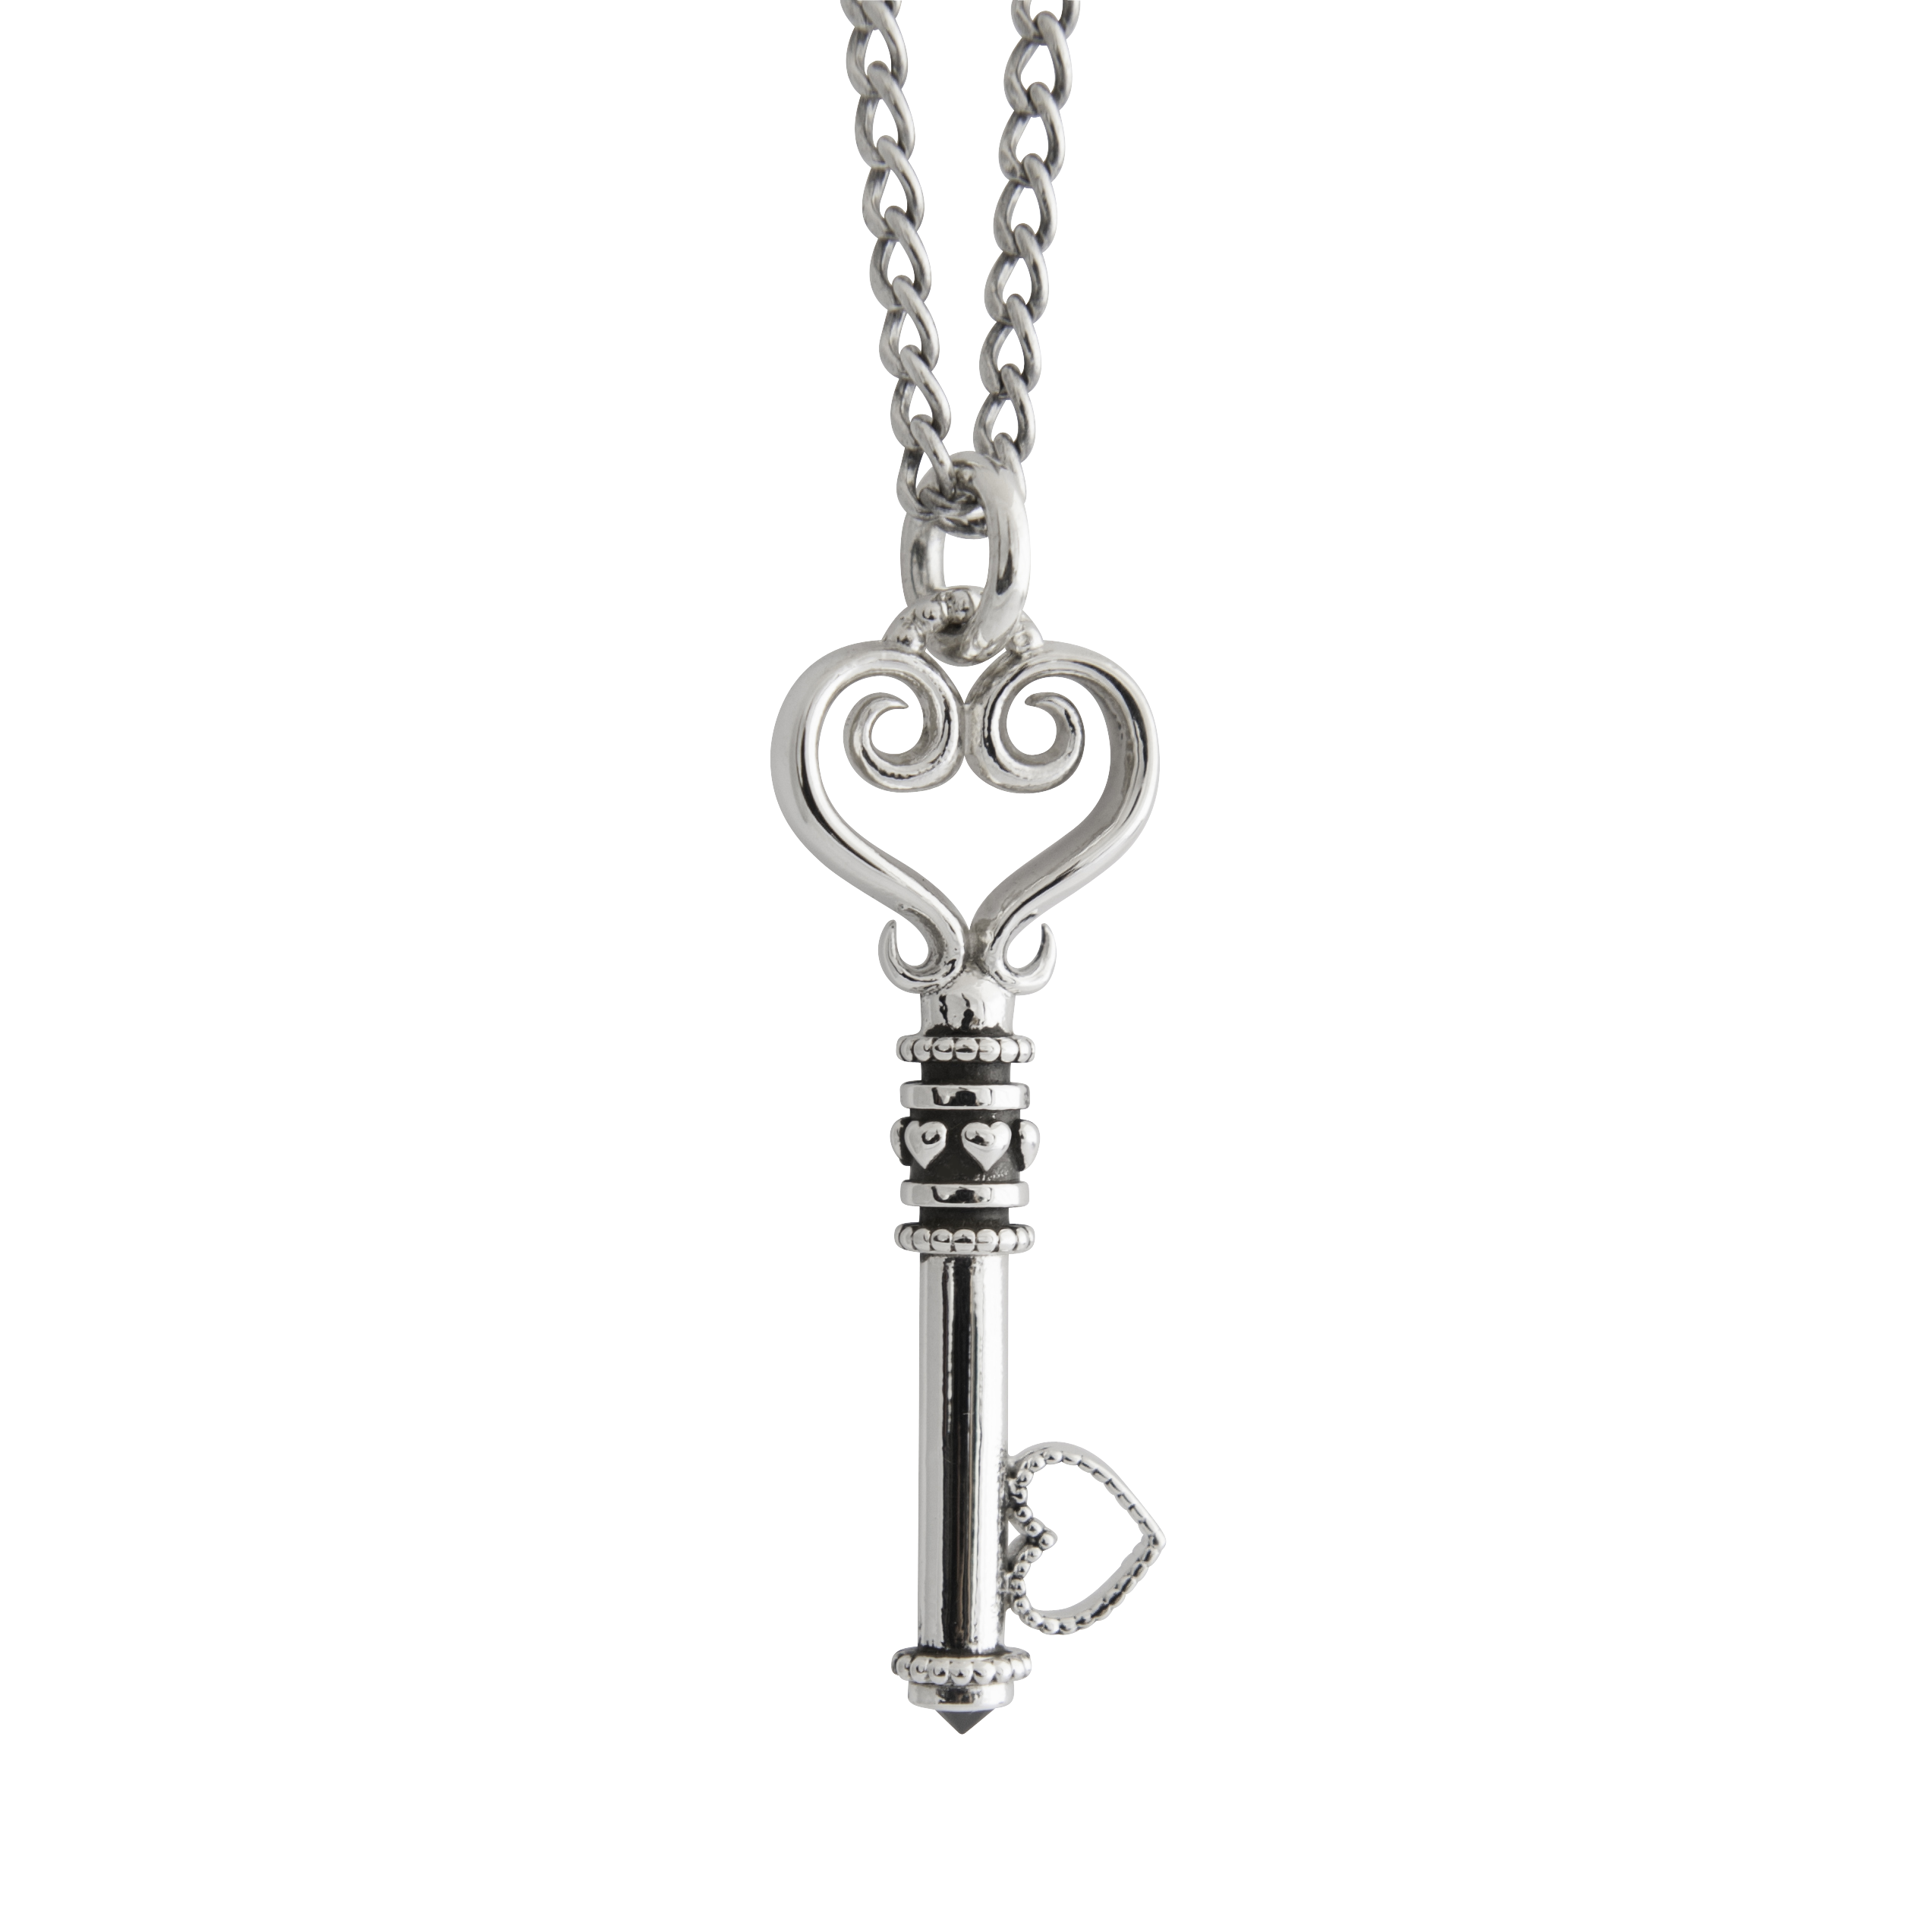 House Silver Key Free Transparent Image HQ PNG Image